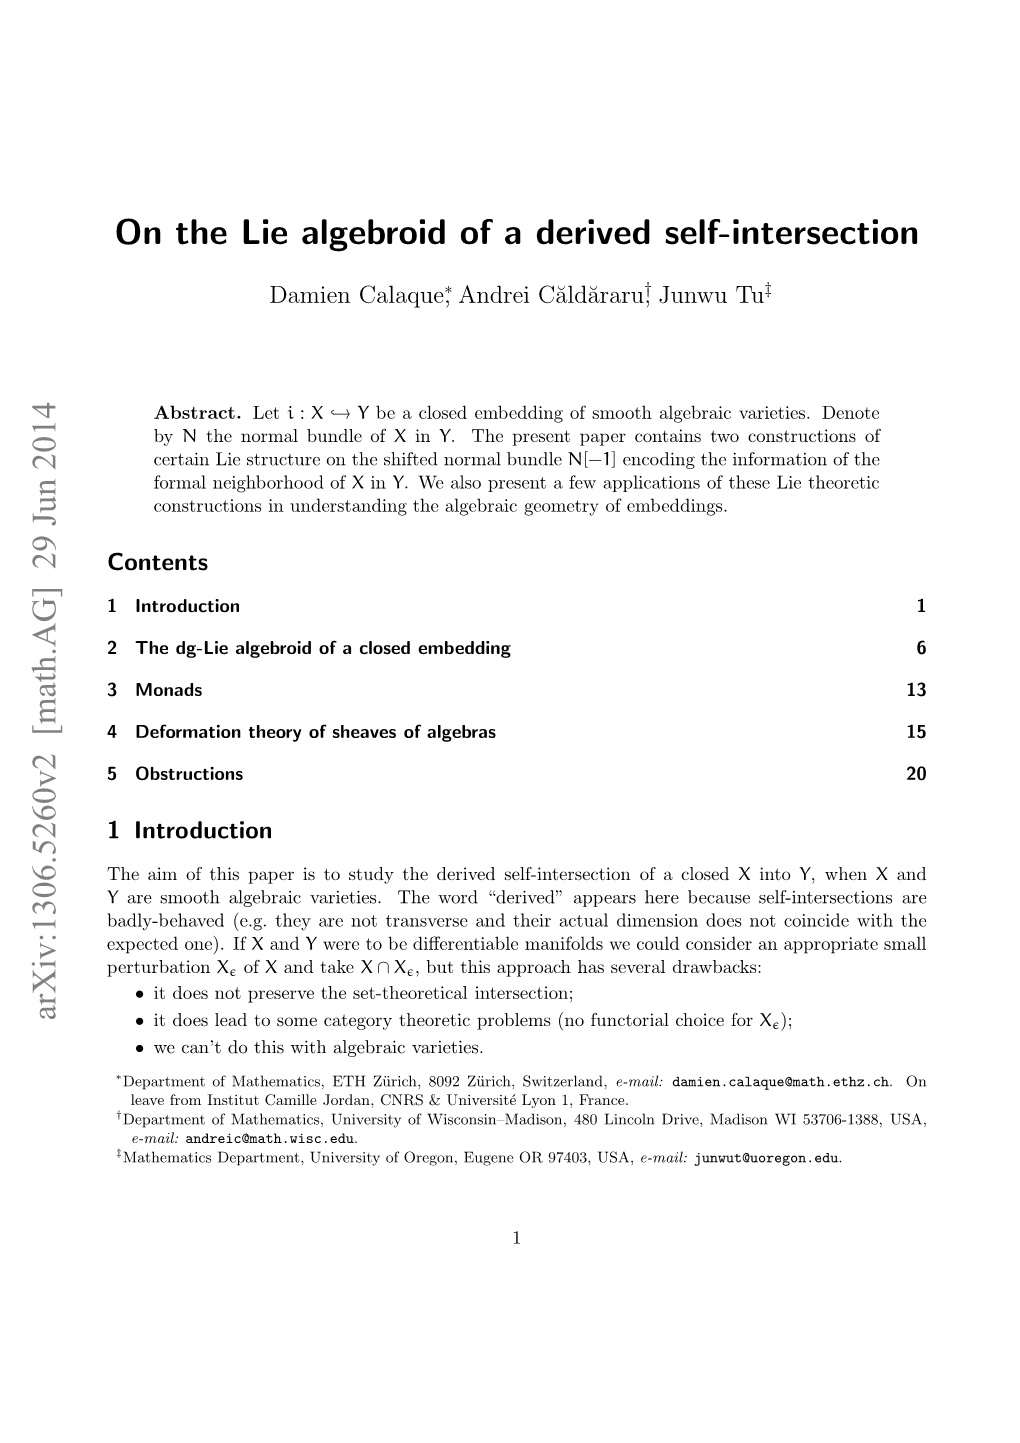 On the Lie Algebroid of a Derived Self-Intersection